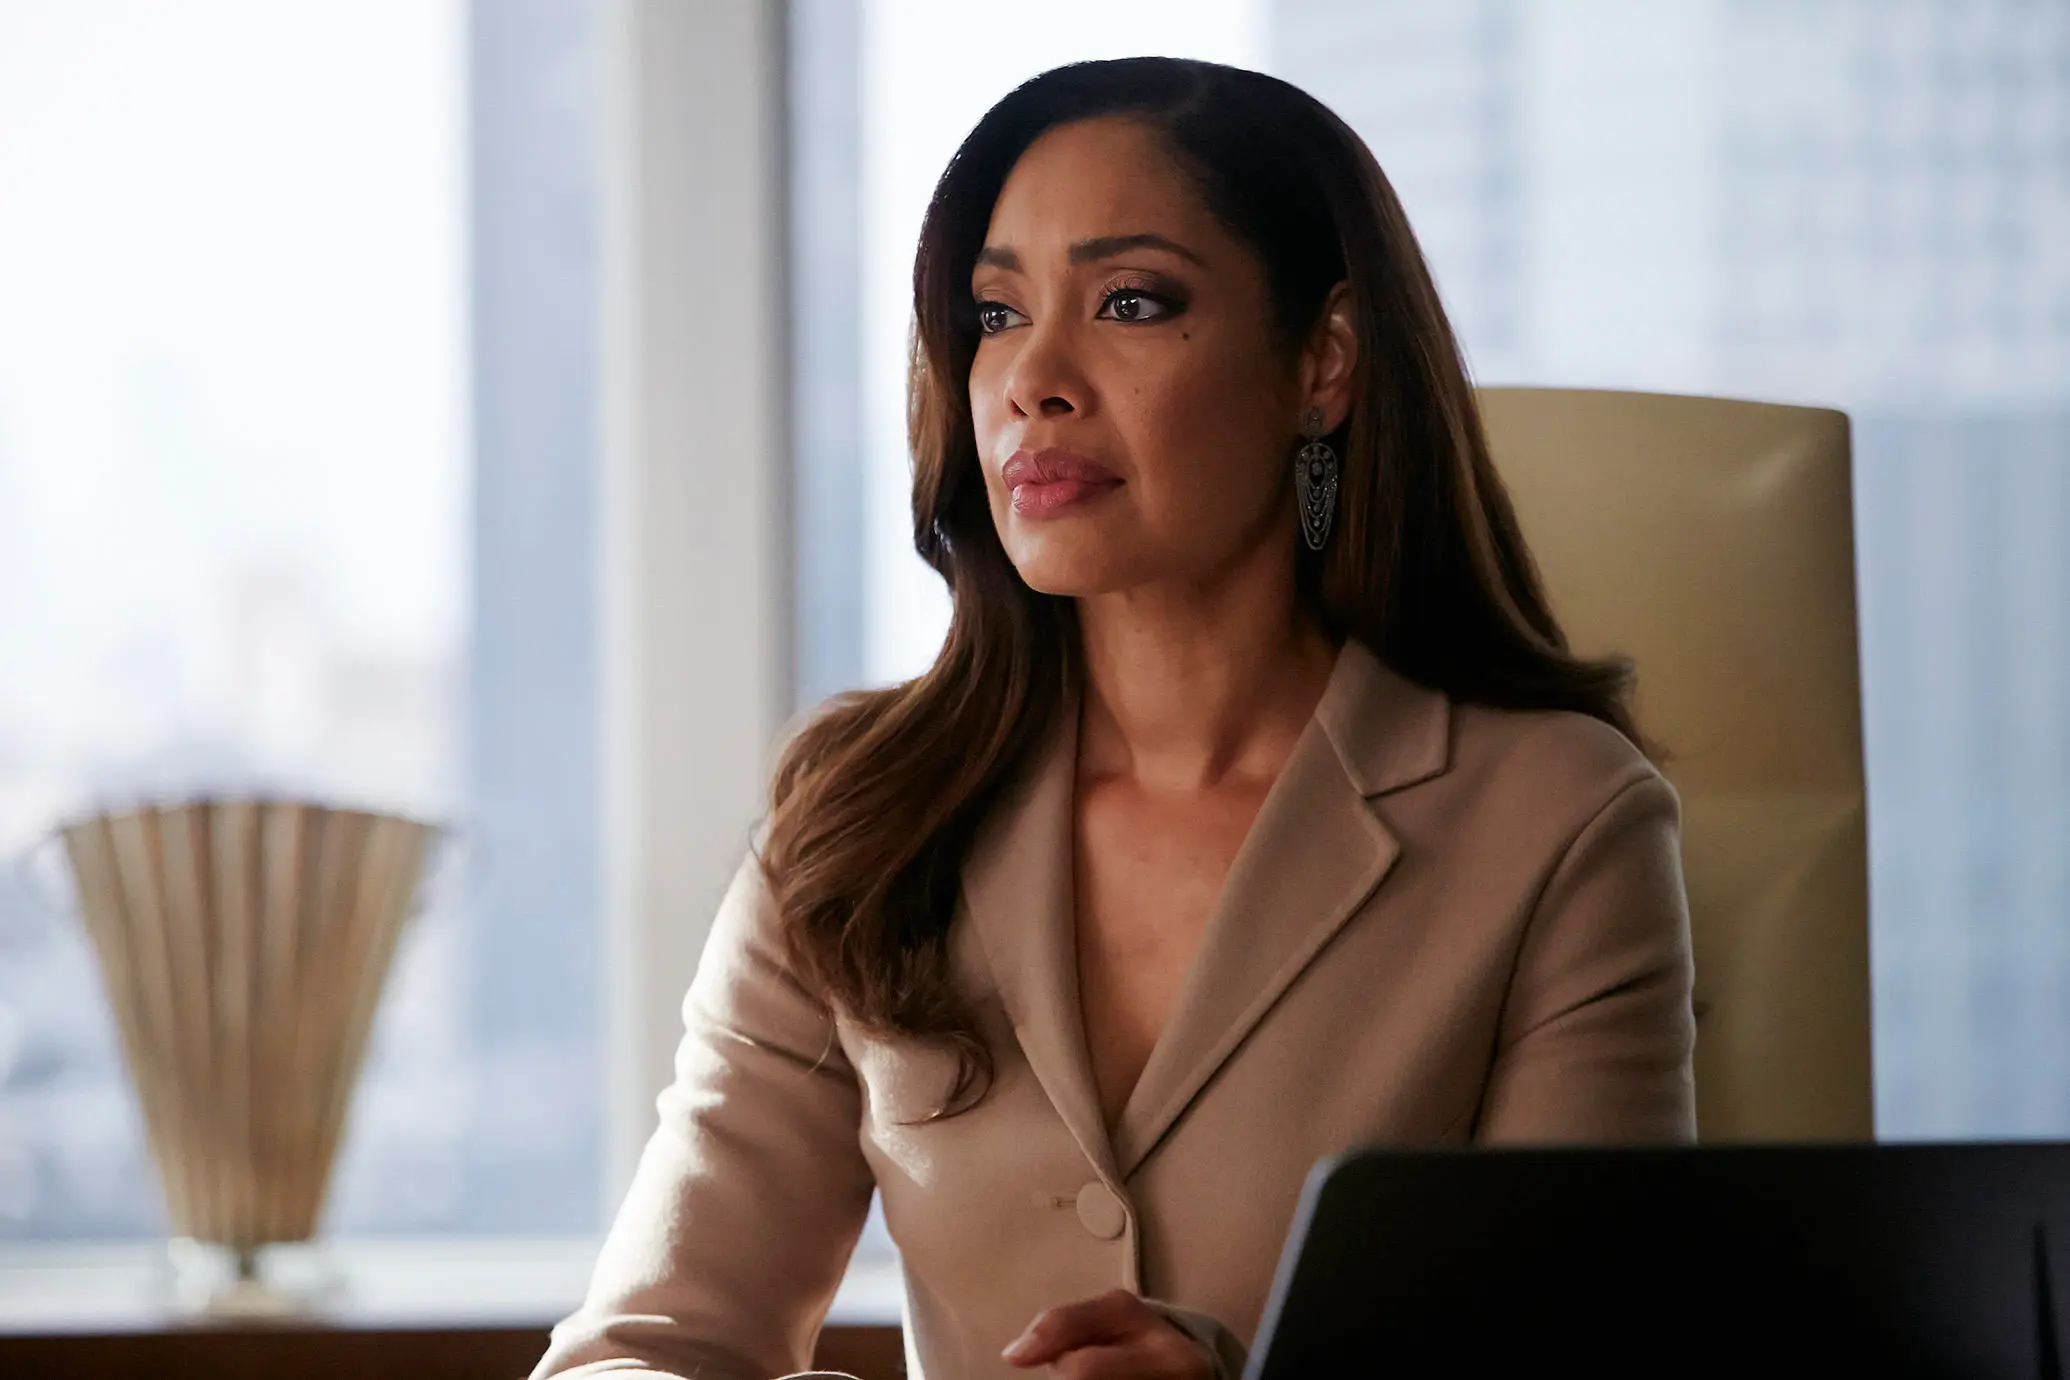 Jessica Lourdes Pearson in the show, Suits (Credits: USA Network)